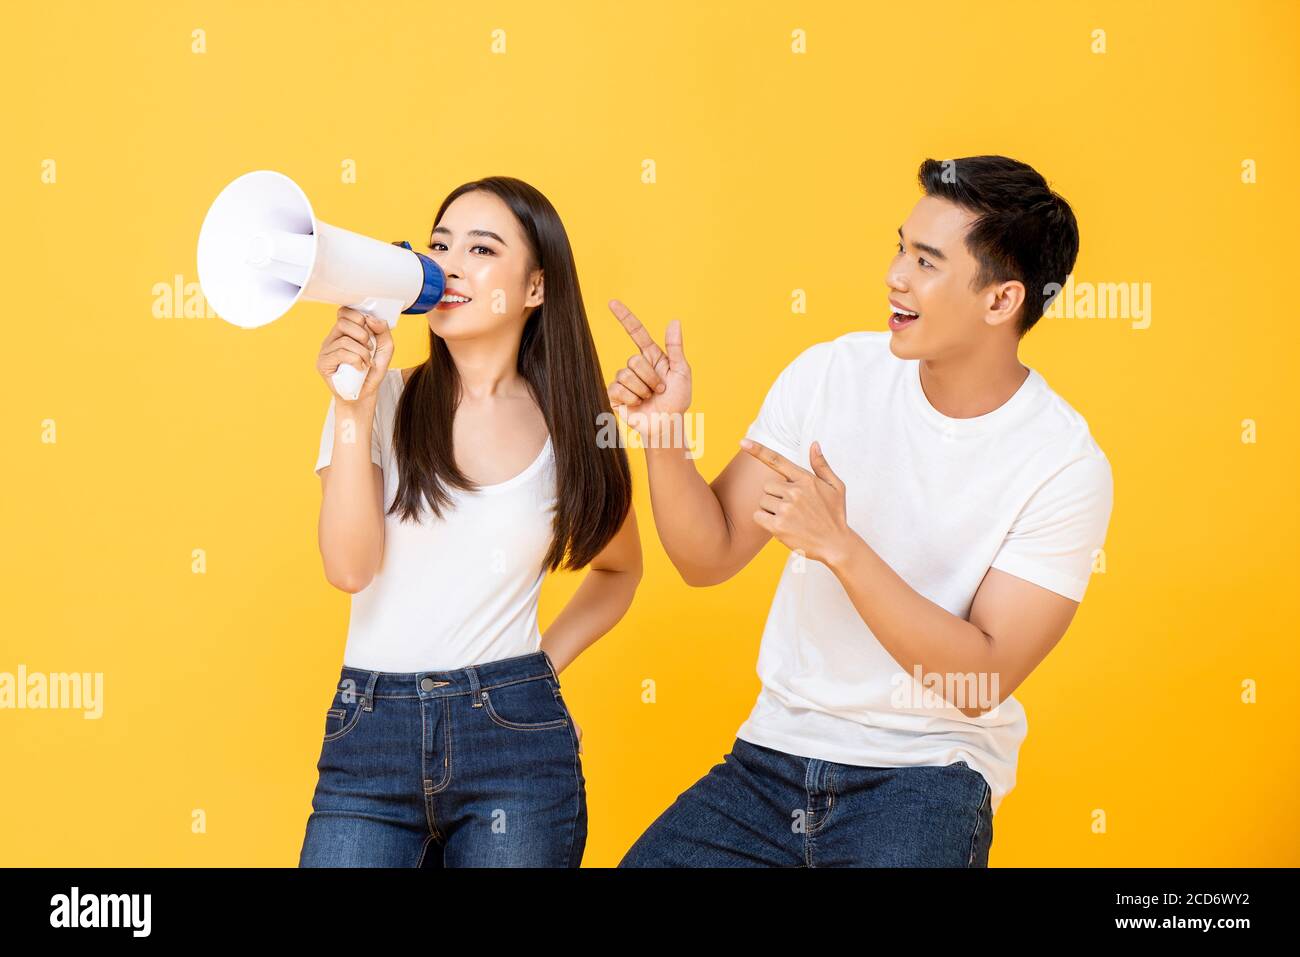 Fun portrait of happy young Asian couple making announcement in isolated studio yellow background Stock Photo